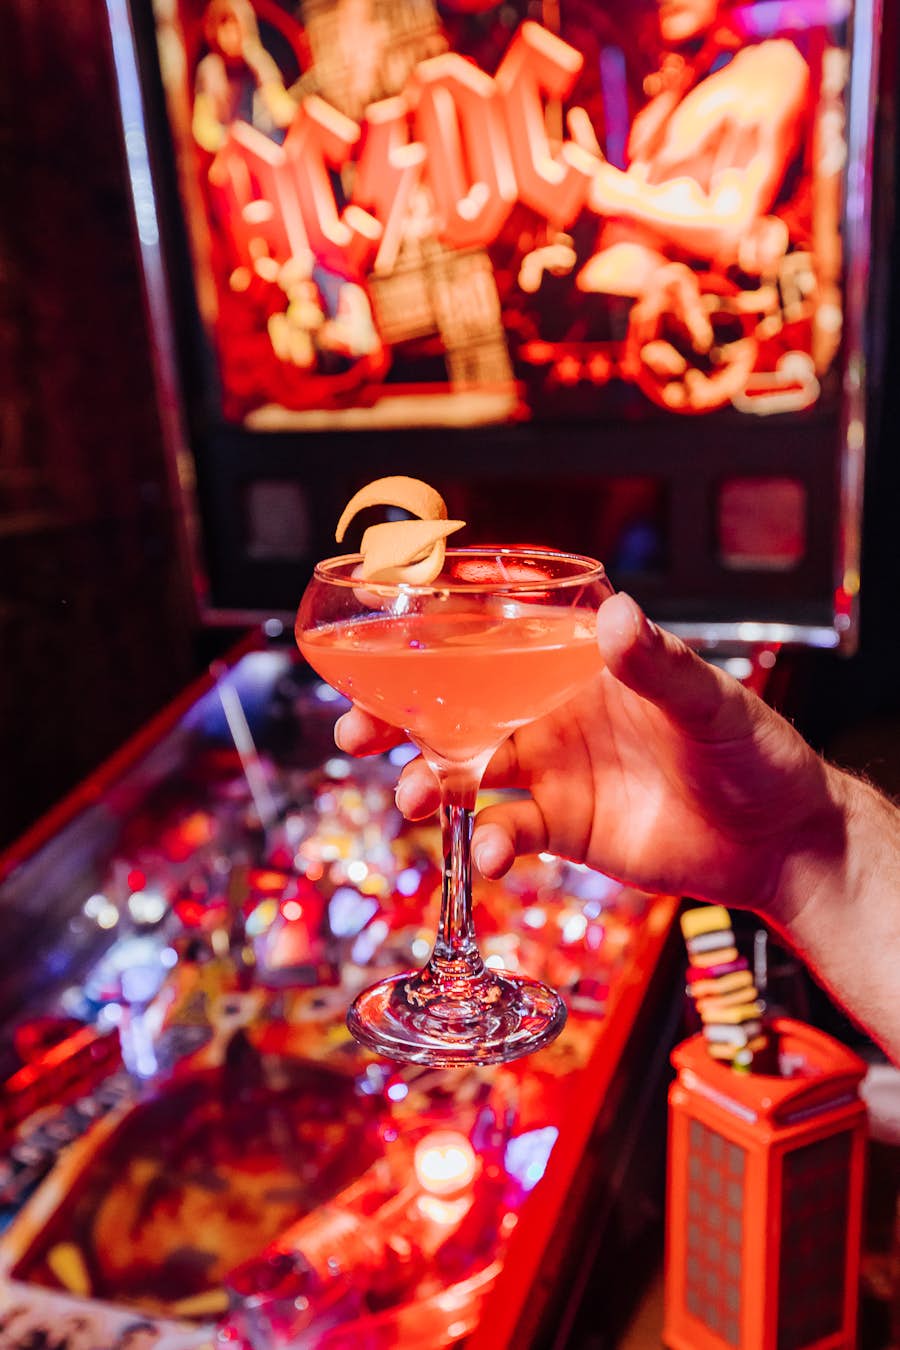 Person holding a cocktail in the foreground with a pin-ball machine in the background